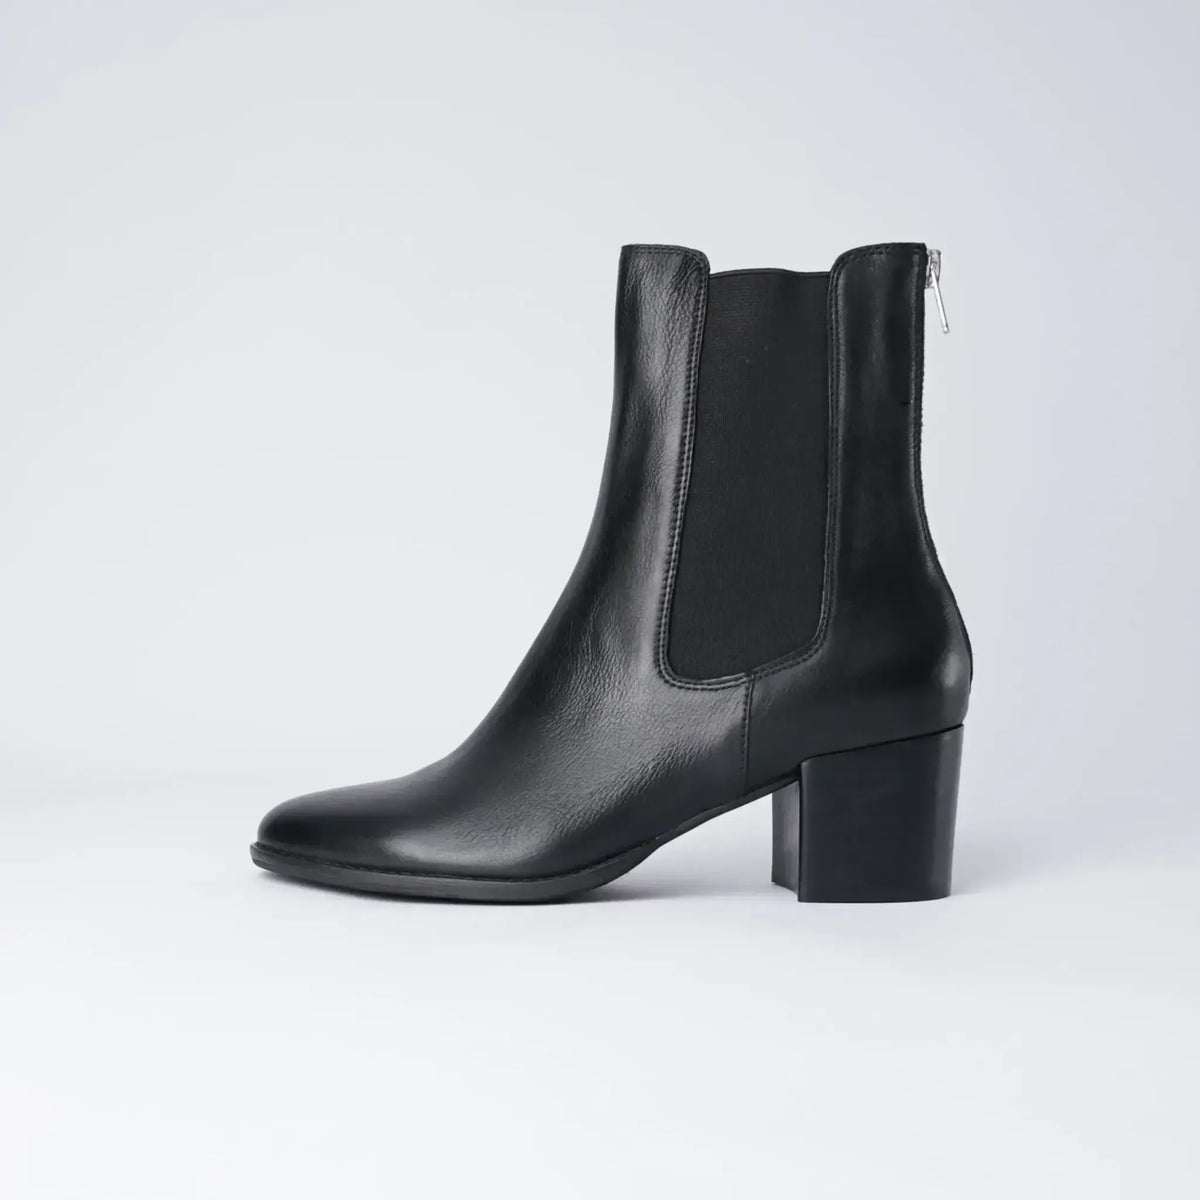 Mycah Black Leather Ankle Boots